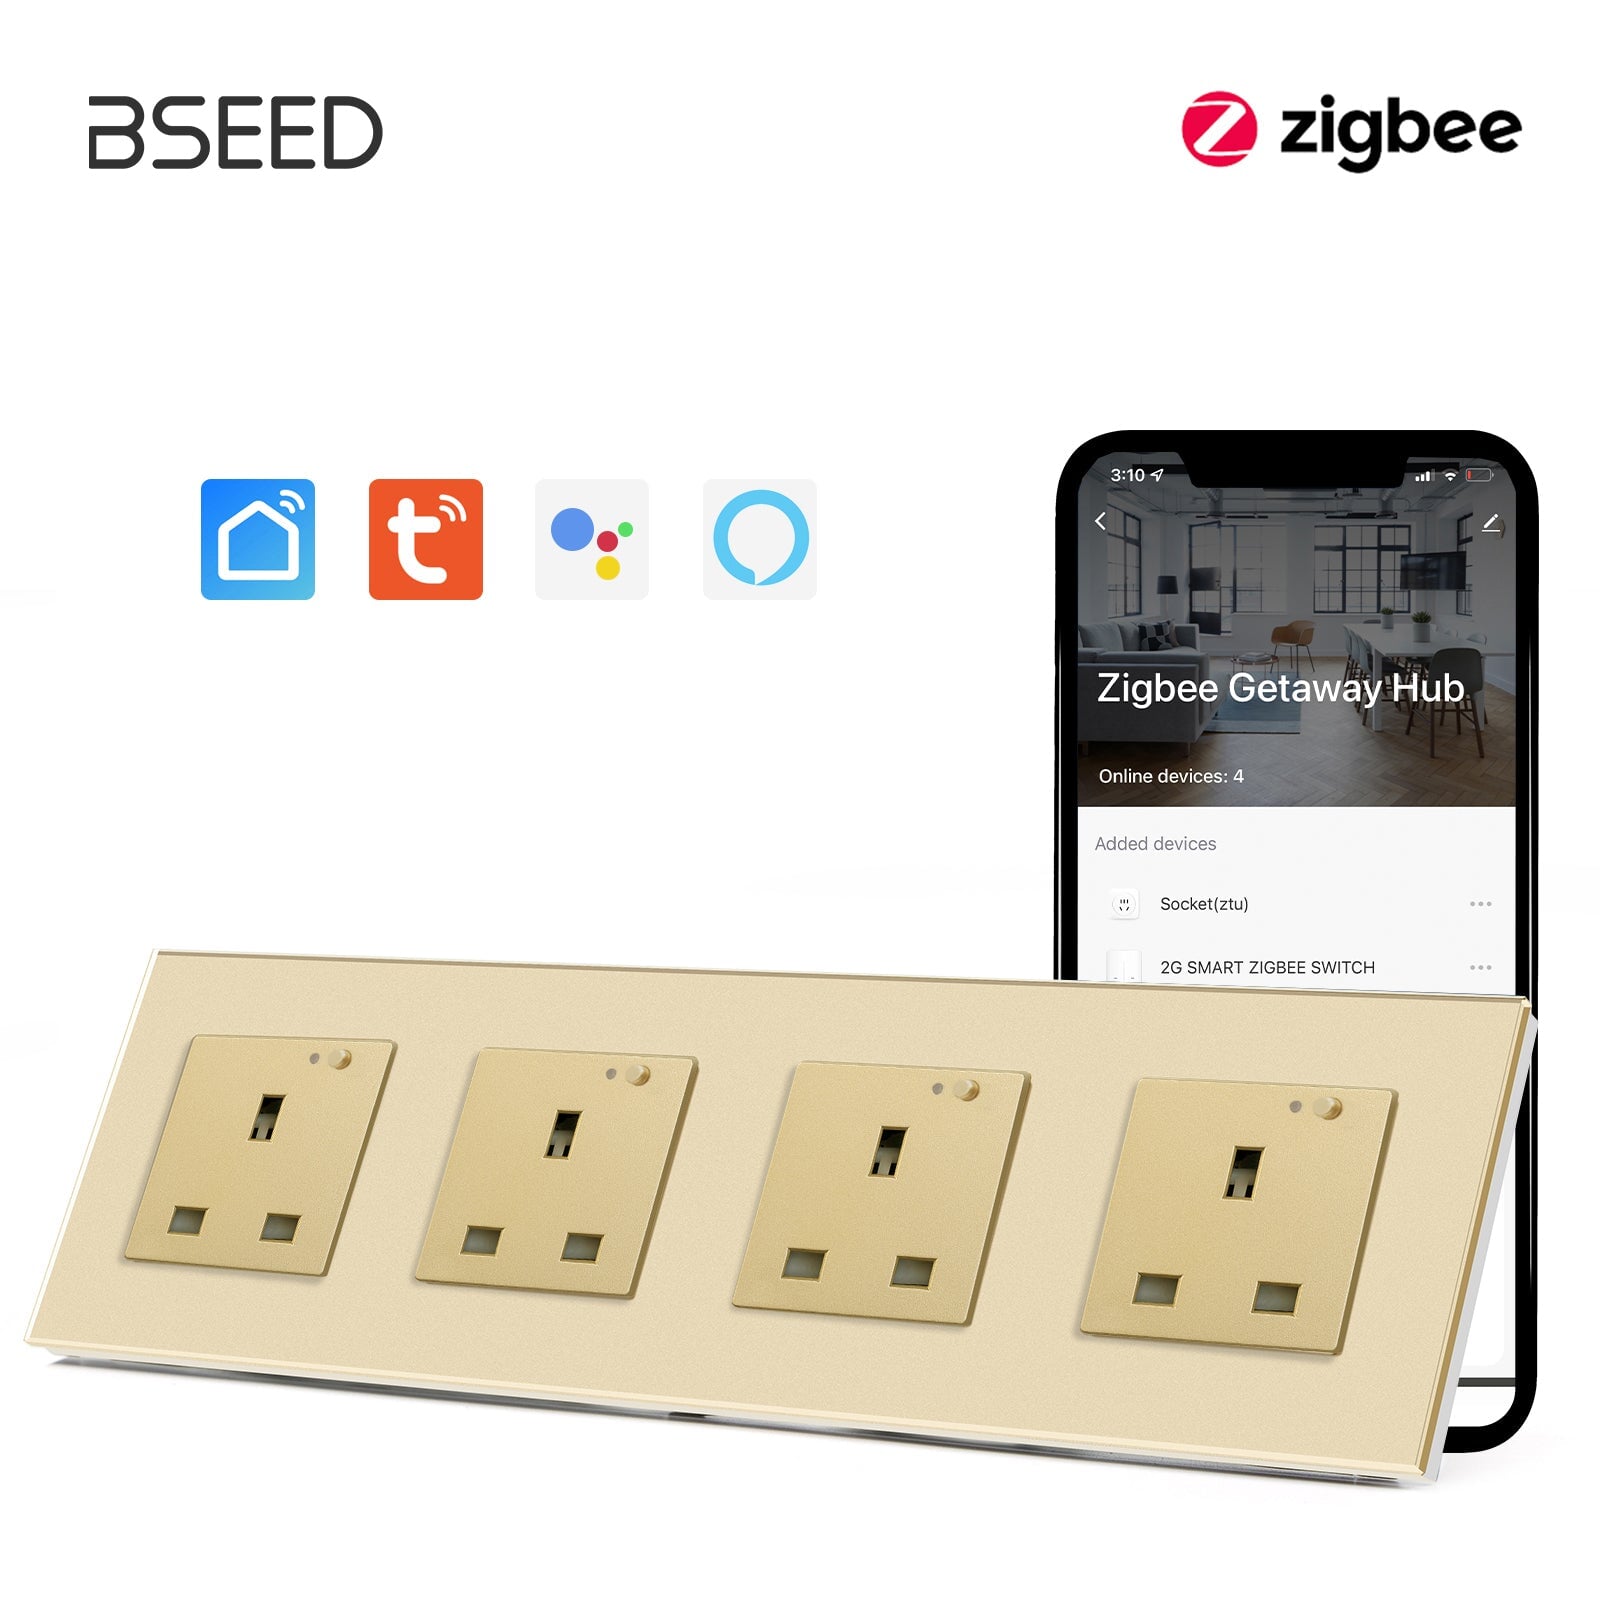 BSEED ZigBee UK Wall Sockets Power Outlets Kids Protection Wall Plates & Covers Bseedswitch golden Quadruple 